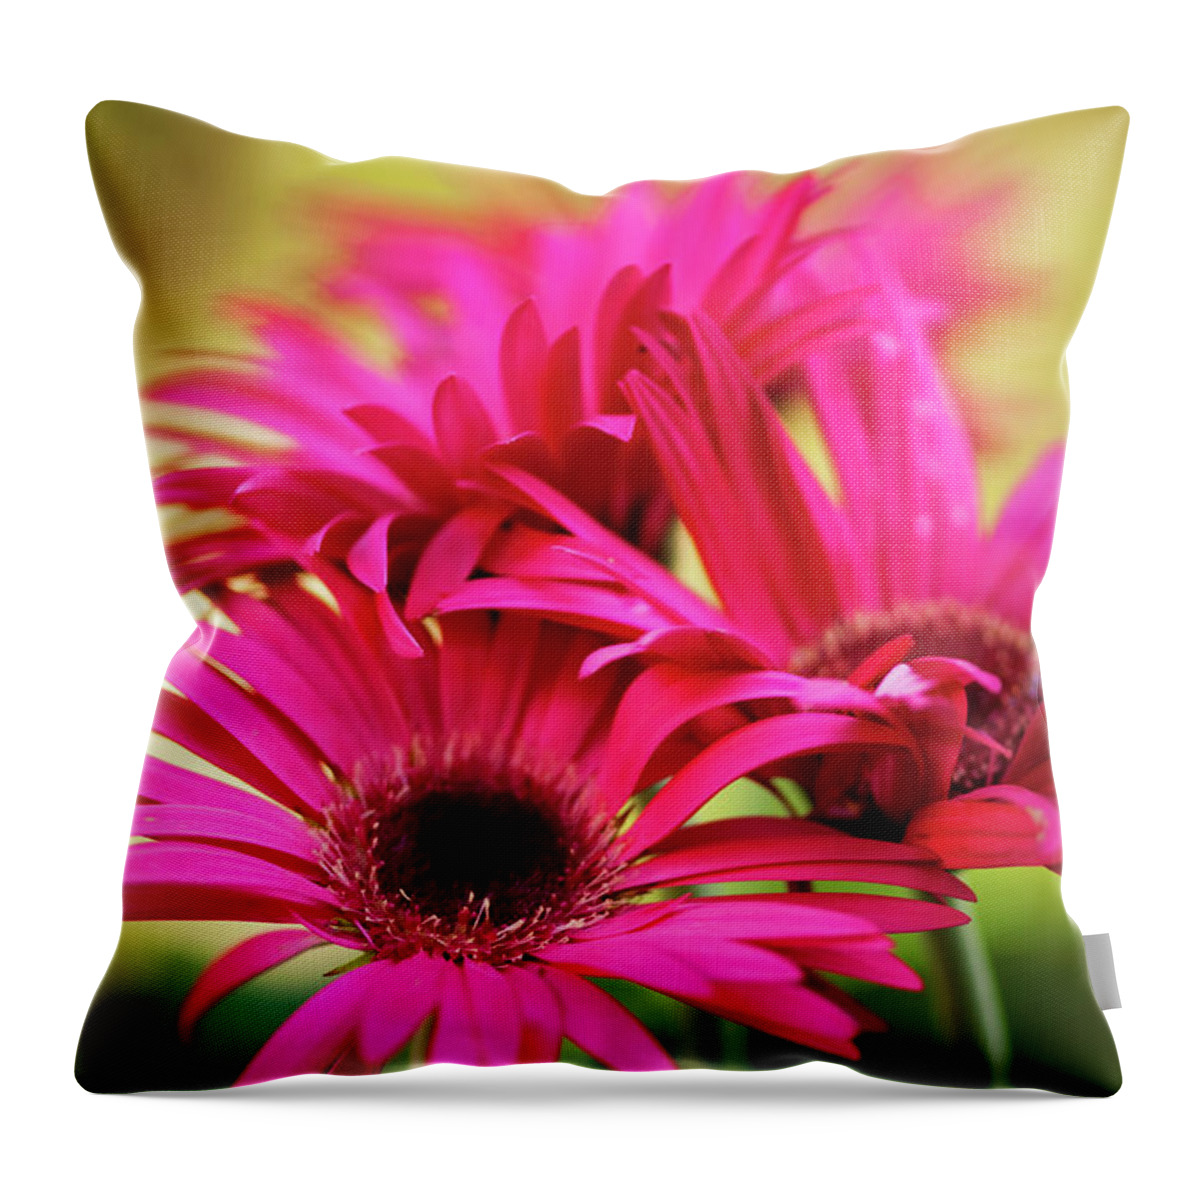 Rockville Throw Pillow featuring the photograph A Group Of Vivid Magenta Pink Gerbera by Maria Mosolova